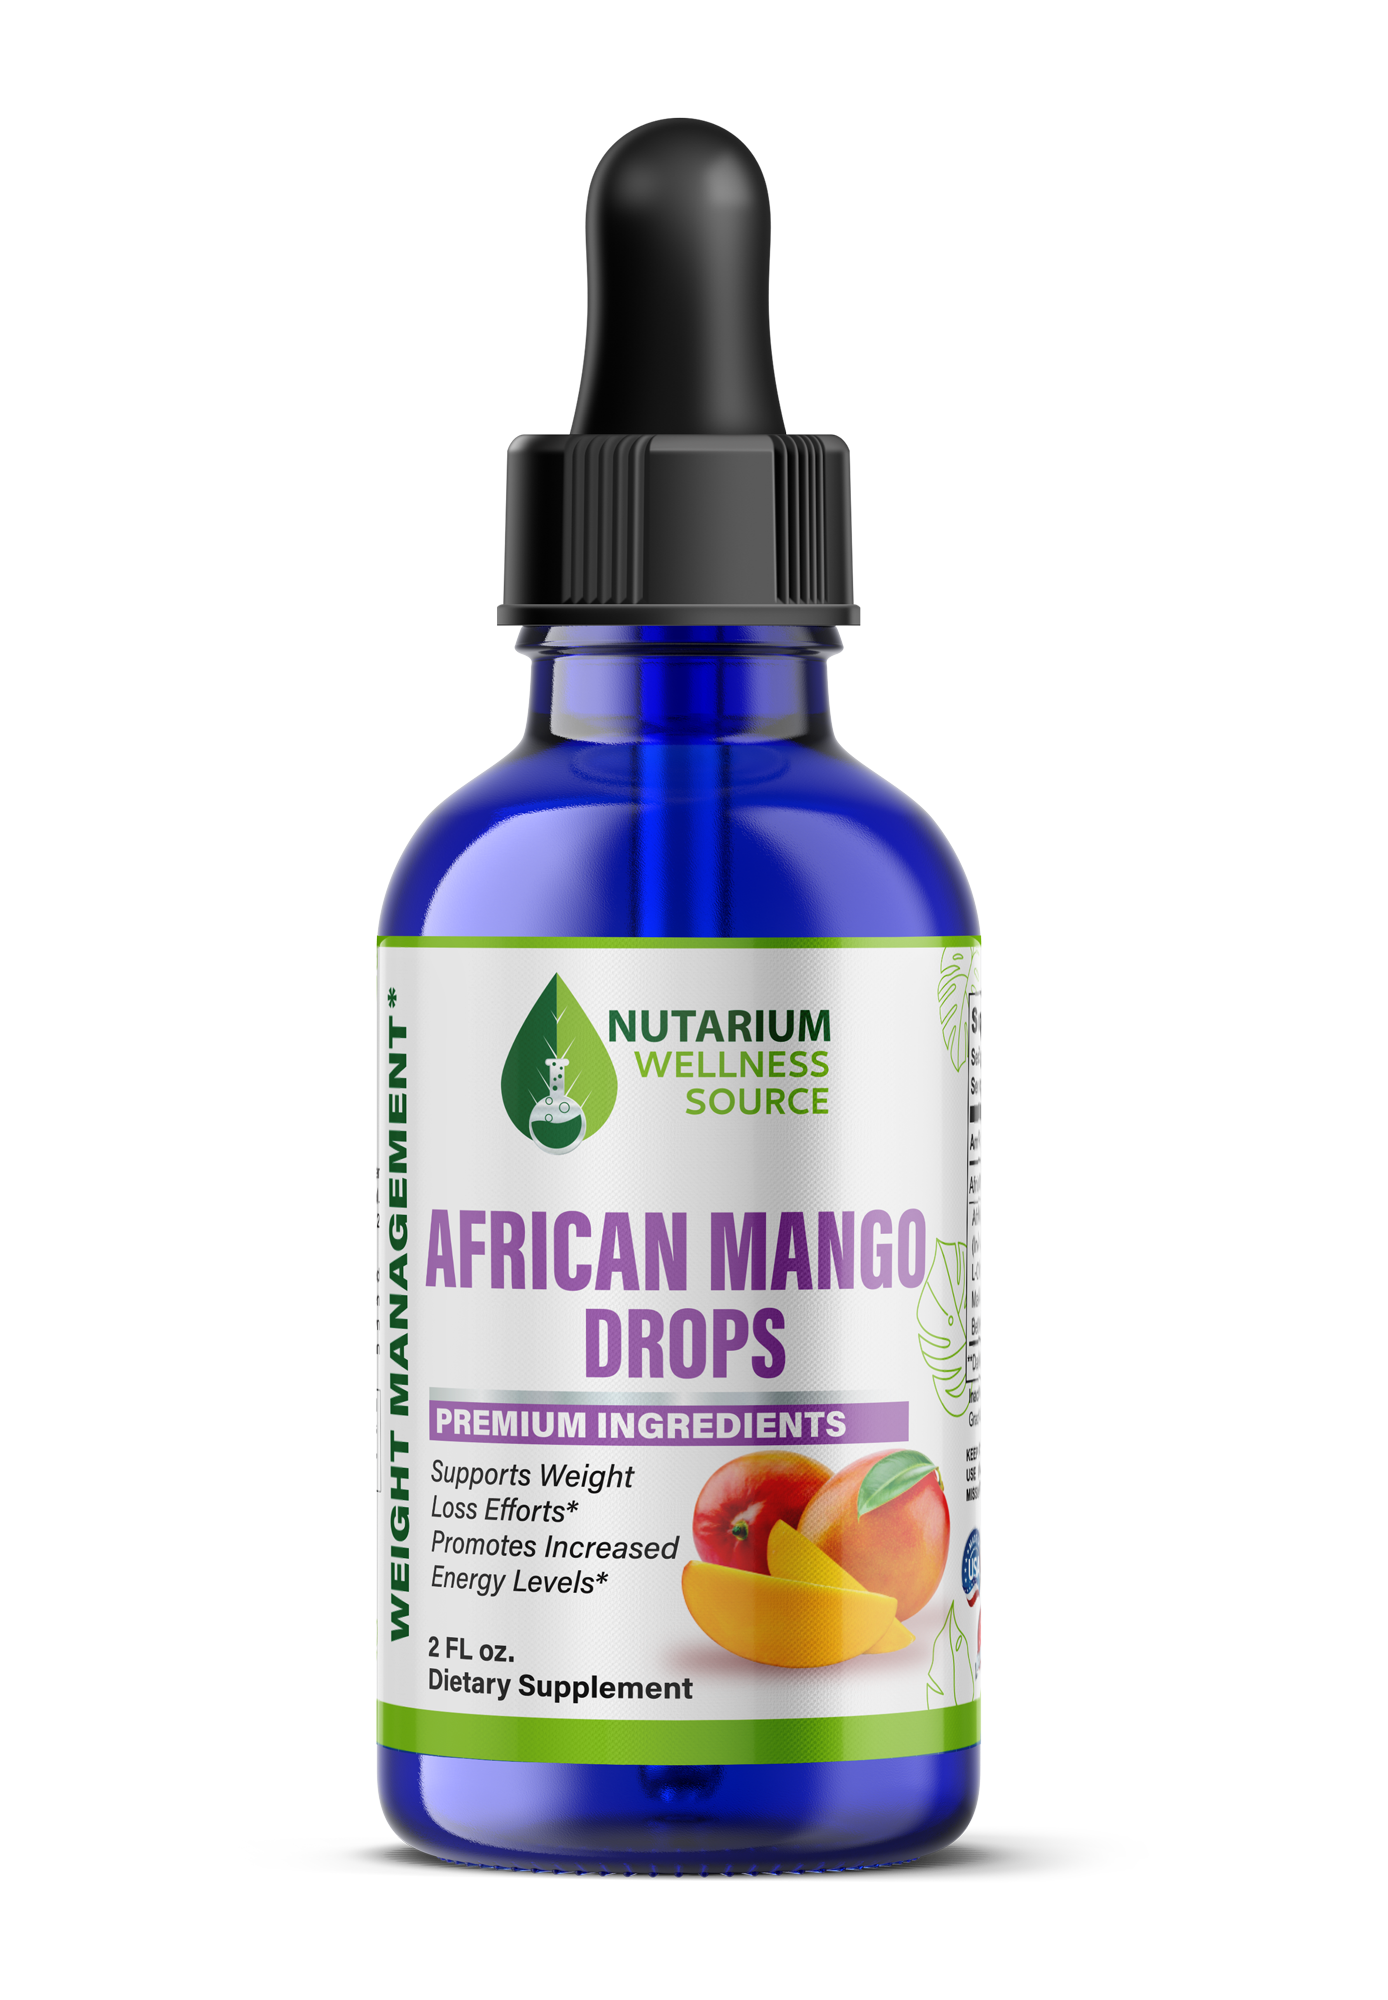 African mango extract for wellness